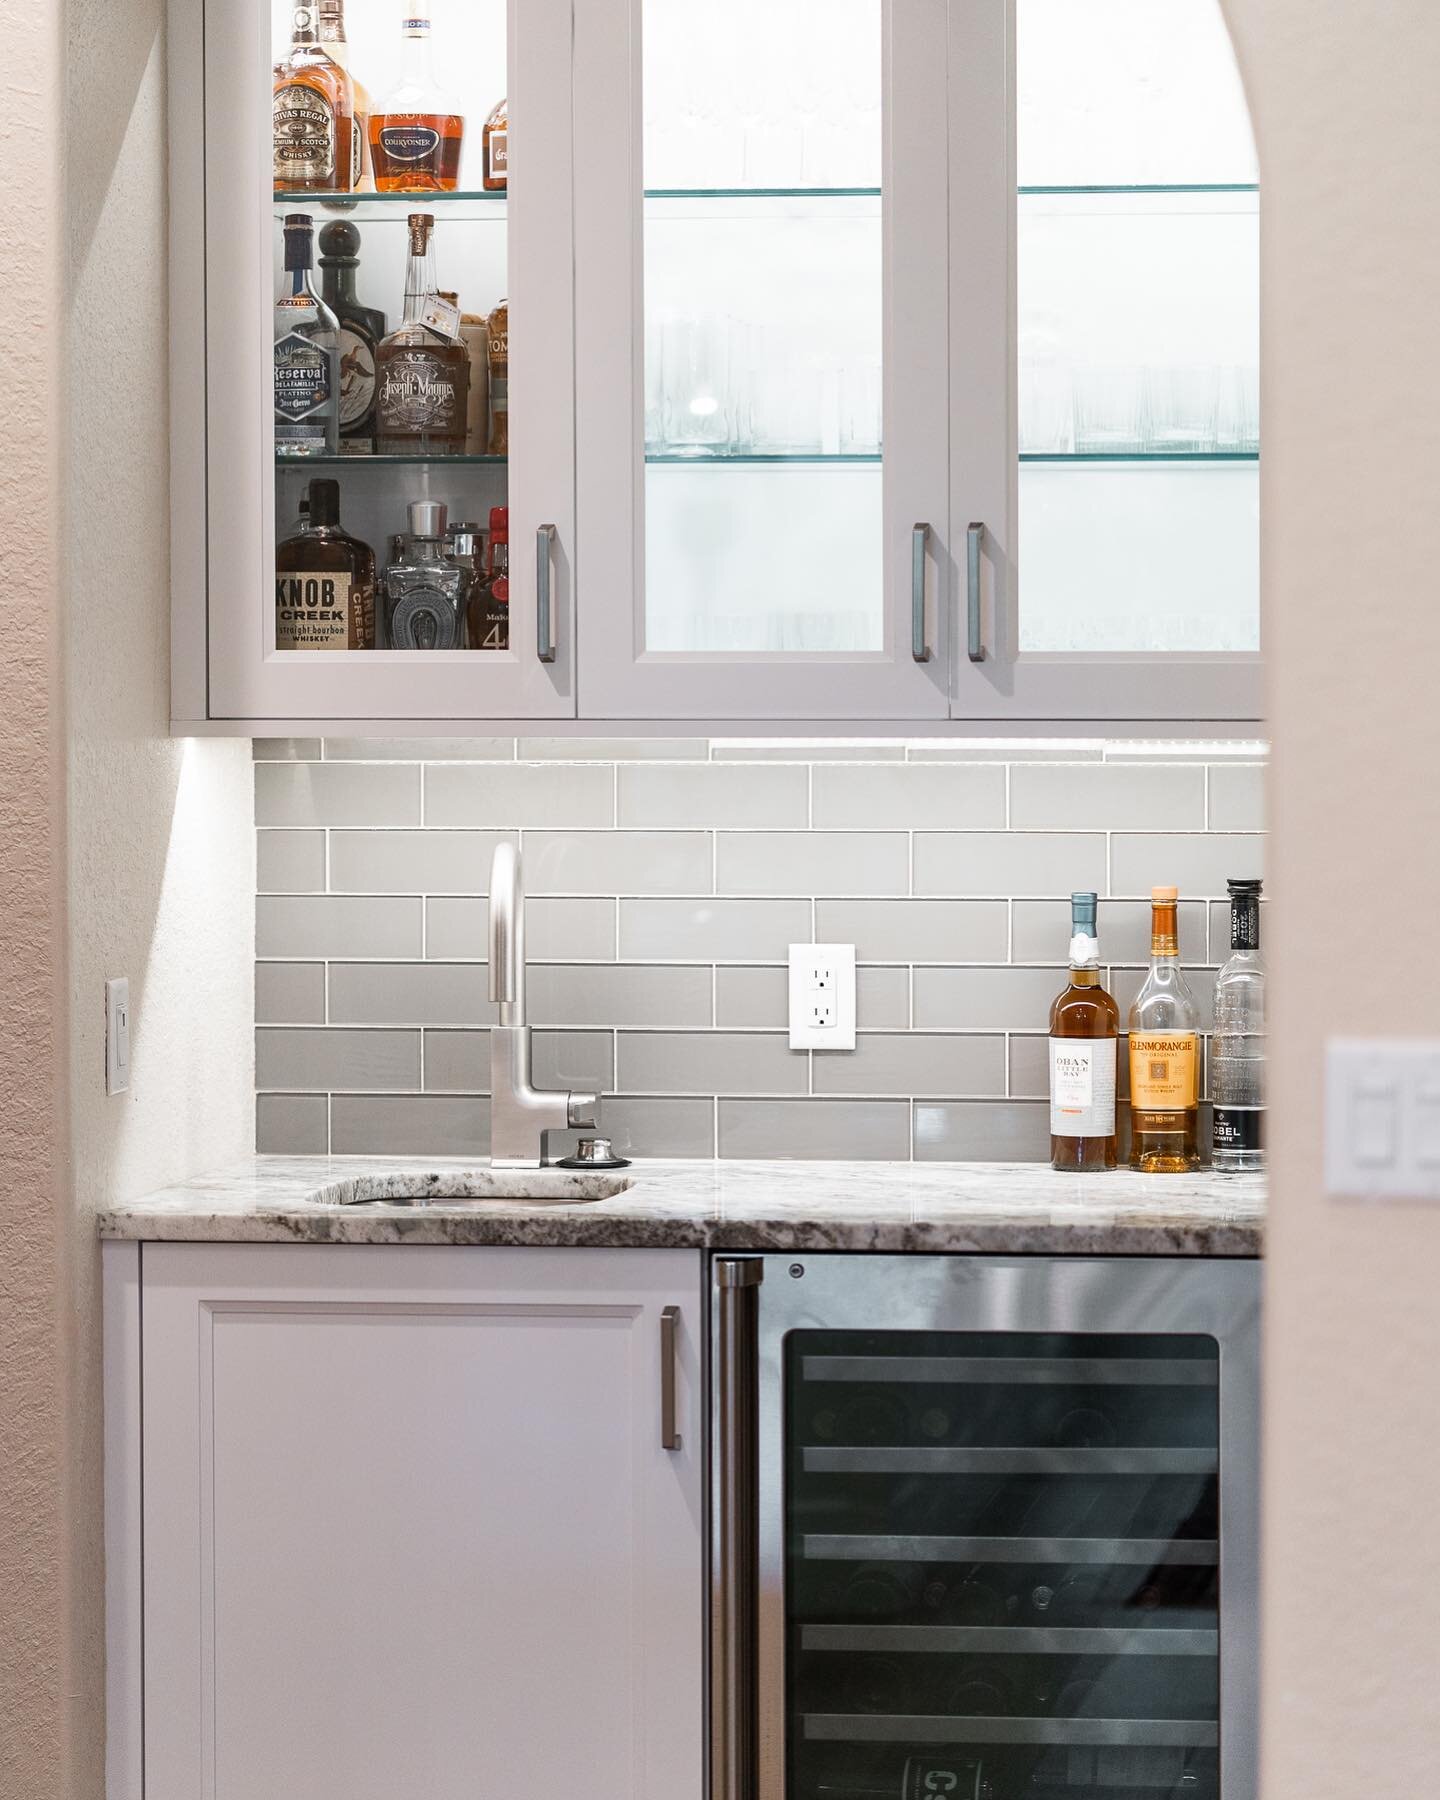 We love to make the most of every inch of space. Our Elegant Transitional project features a custom wet bar tucked away just off the main kitchen space. 
&bull;
&bull;
#kitchendesign #kitchen #kitchenremodel #kitchendecor #kitchengoals #accentwall #i